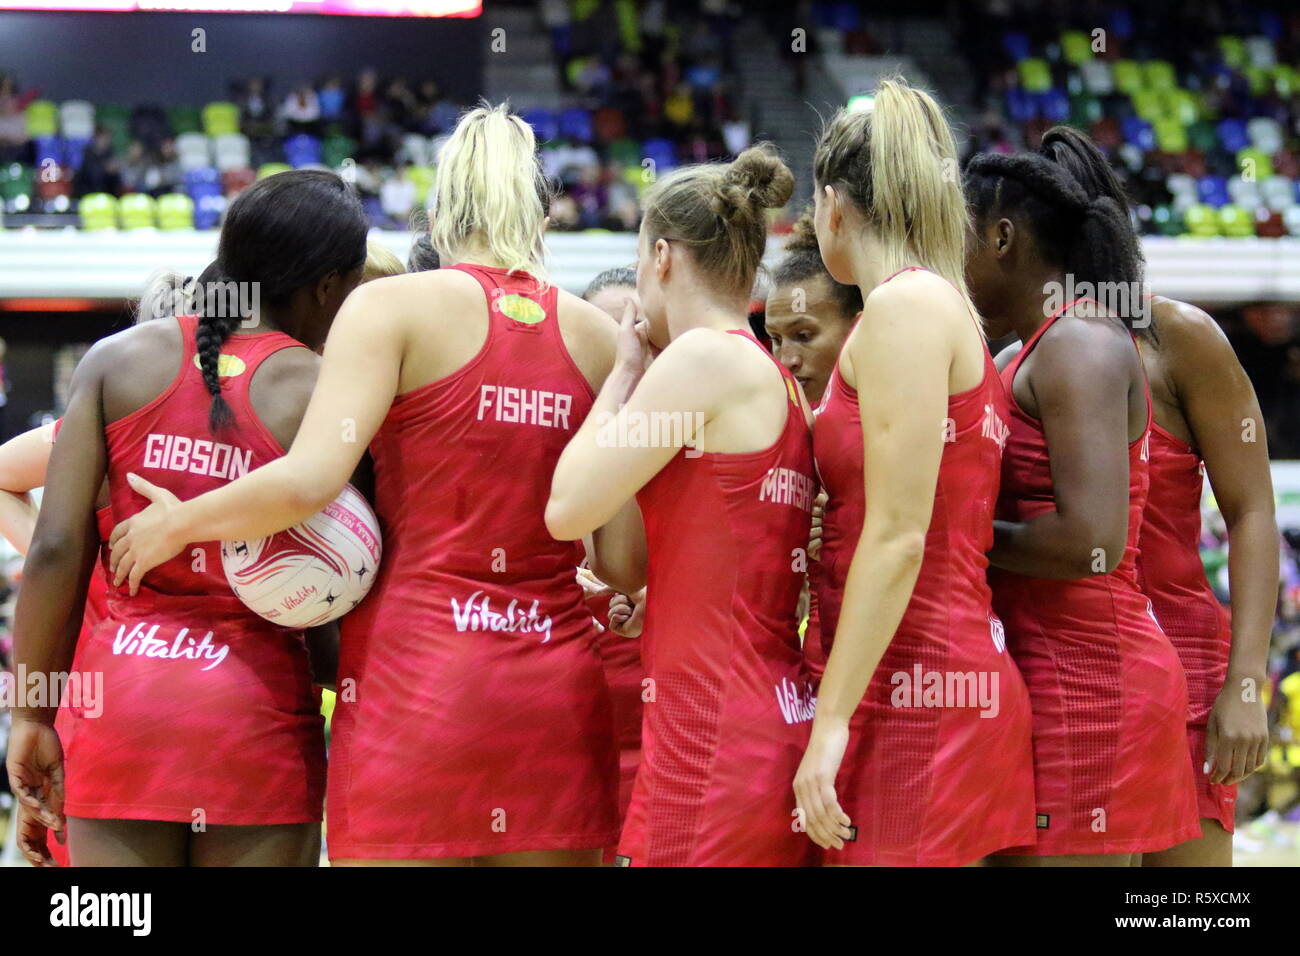 LONDON, UK. 2nd Dec, 2018. The Vitality Roses Squad group on court ahead of the Vitality Netball International Series match between England and Uganda at the Copper Box Arena on December 2, 2018 in London, England, UK Credit: Grant Burton/Alamy Live News Stock Photo